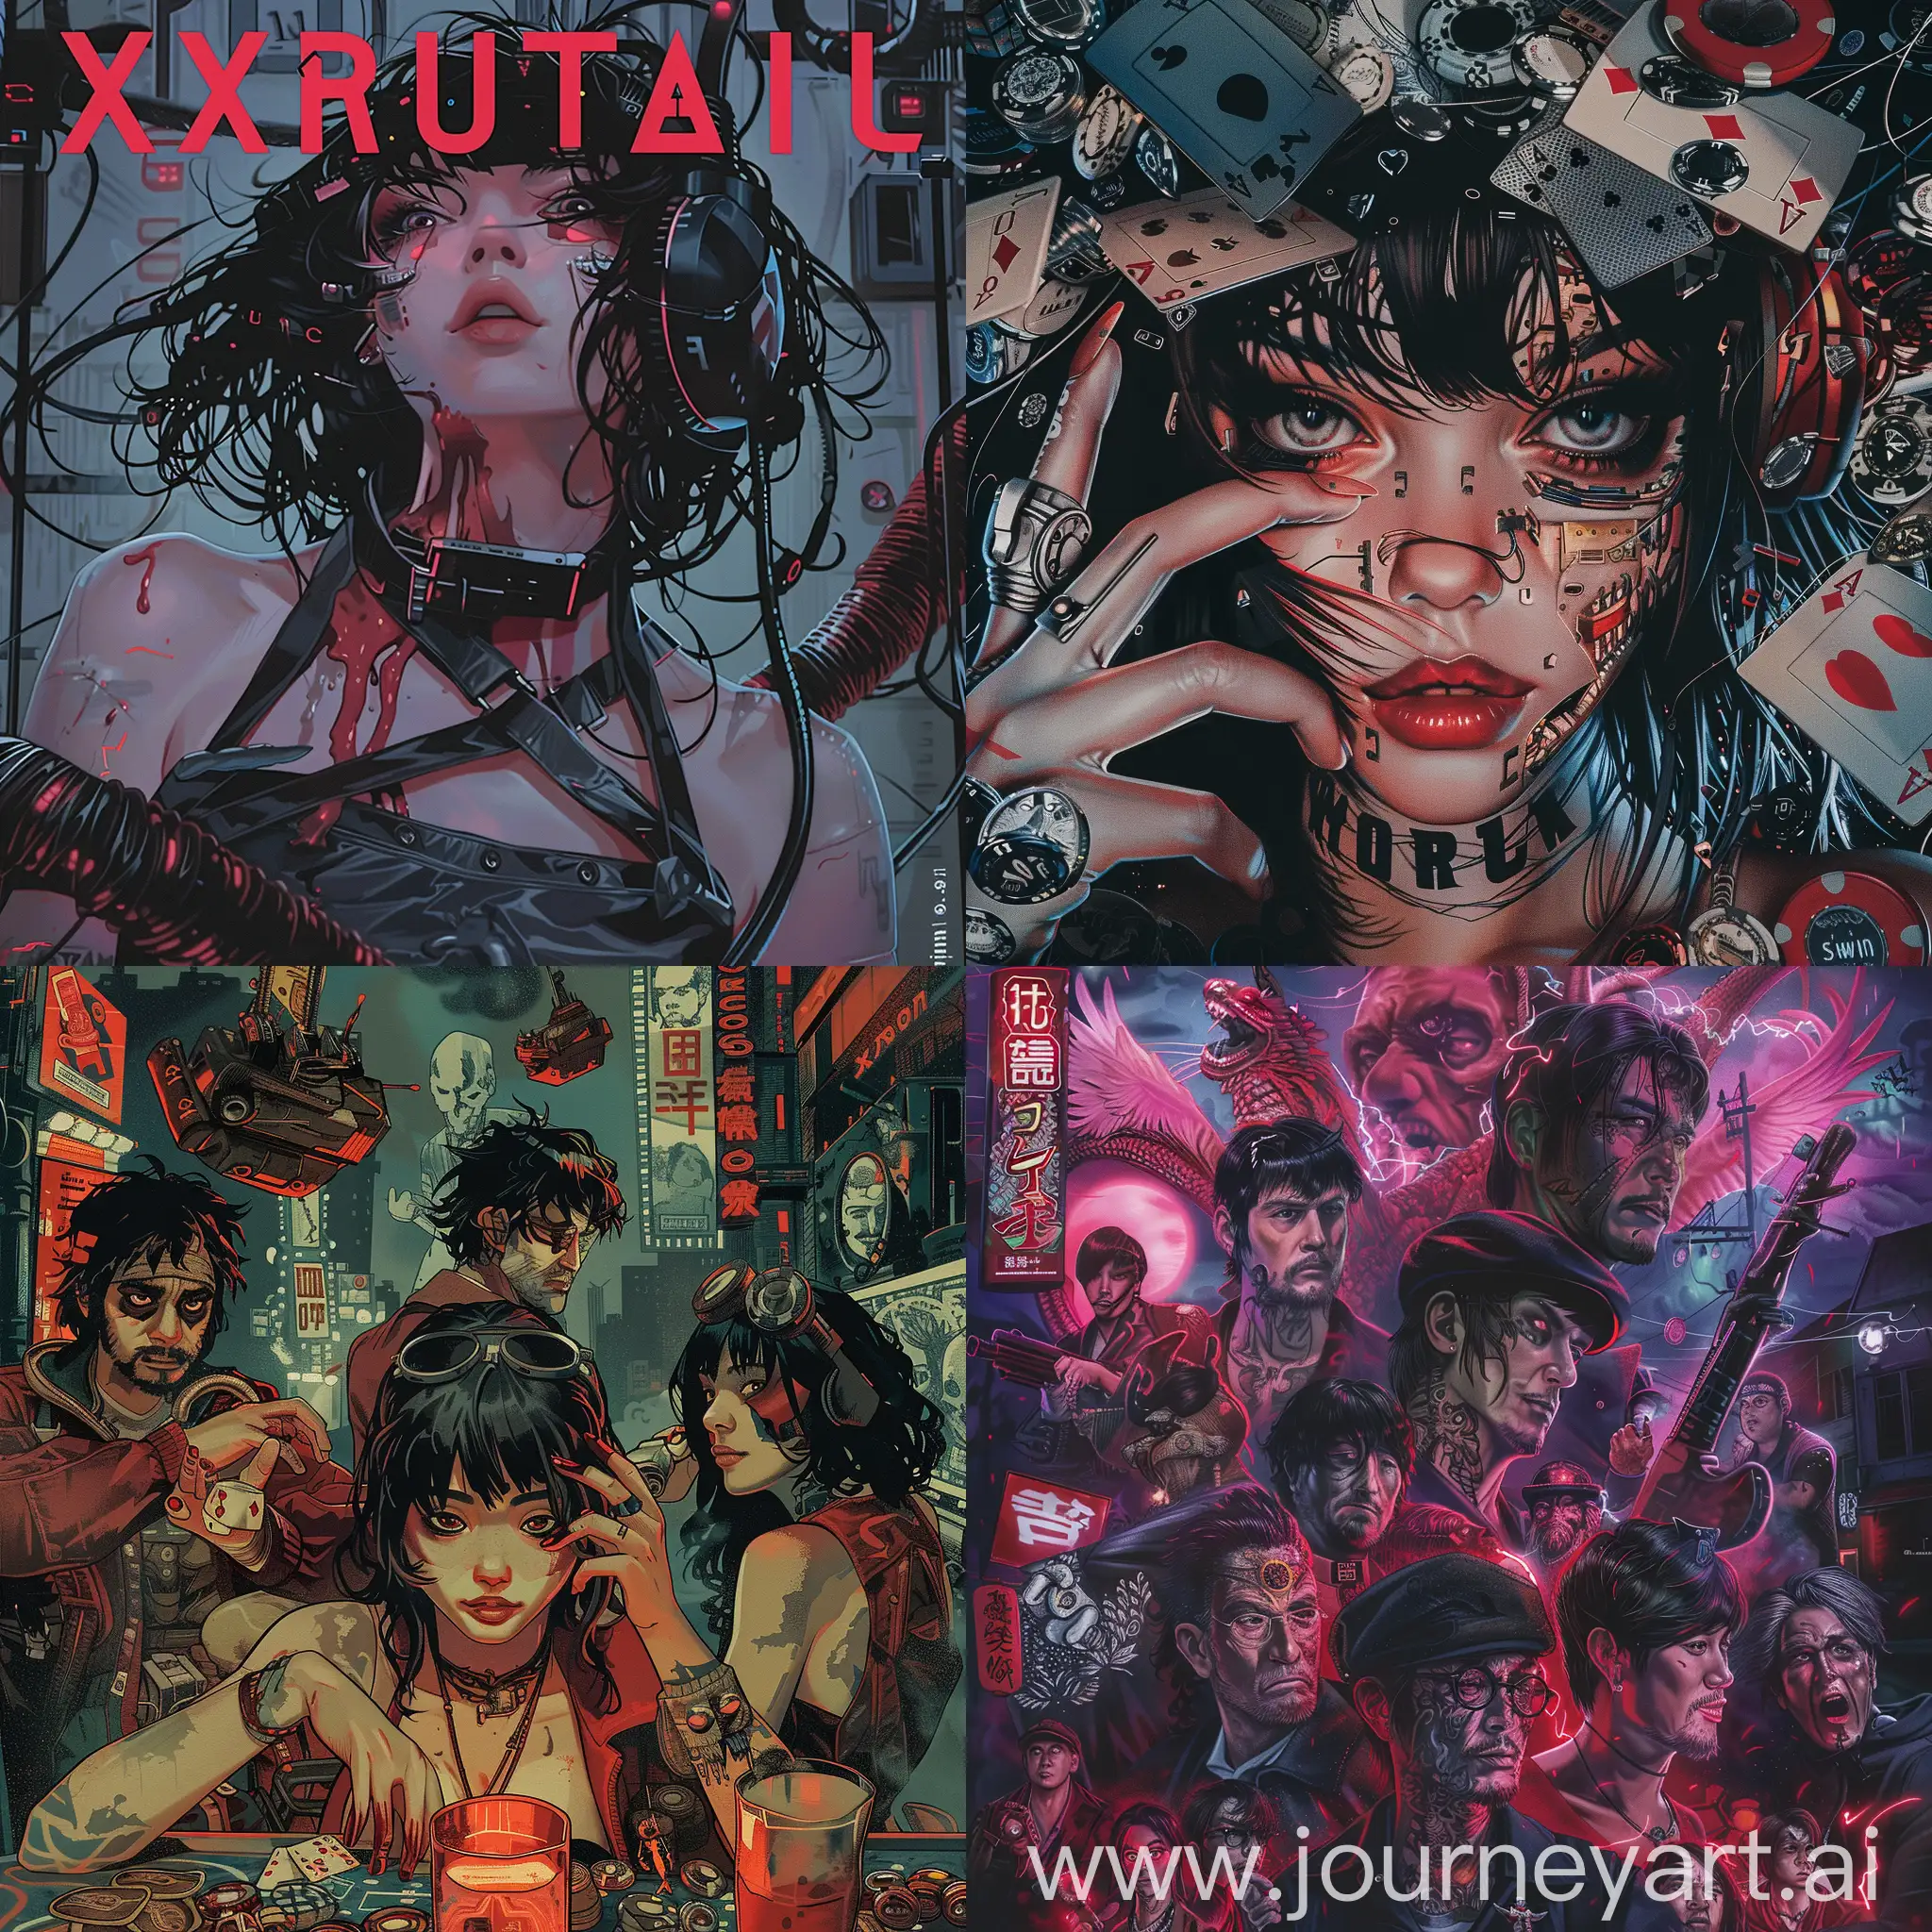 Cover for music albu looks like At the Drive - In - In  Casino Out cover, Natsumi - Easy game, Gatherers - (mutilator.),  XRUSTALIC – SHOOTING DISTANCE, Swin.del - Большие смыслы ни о чем